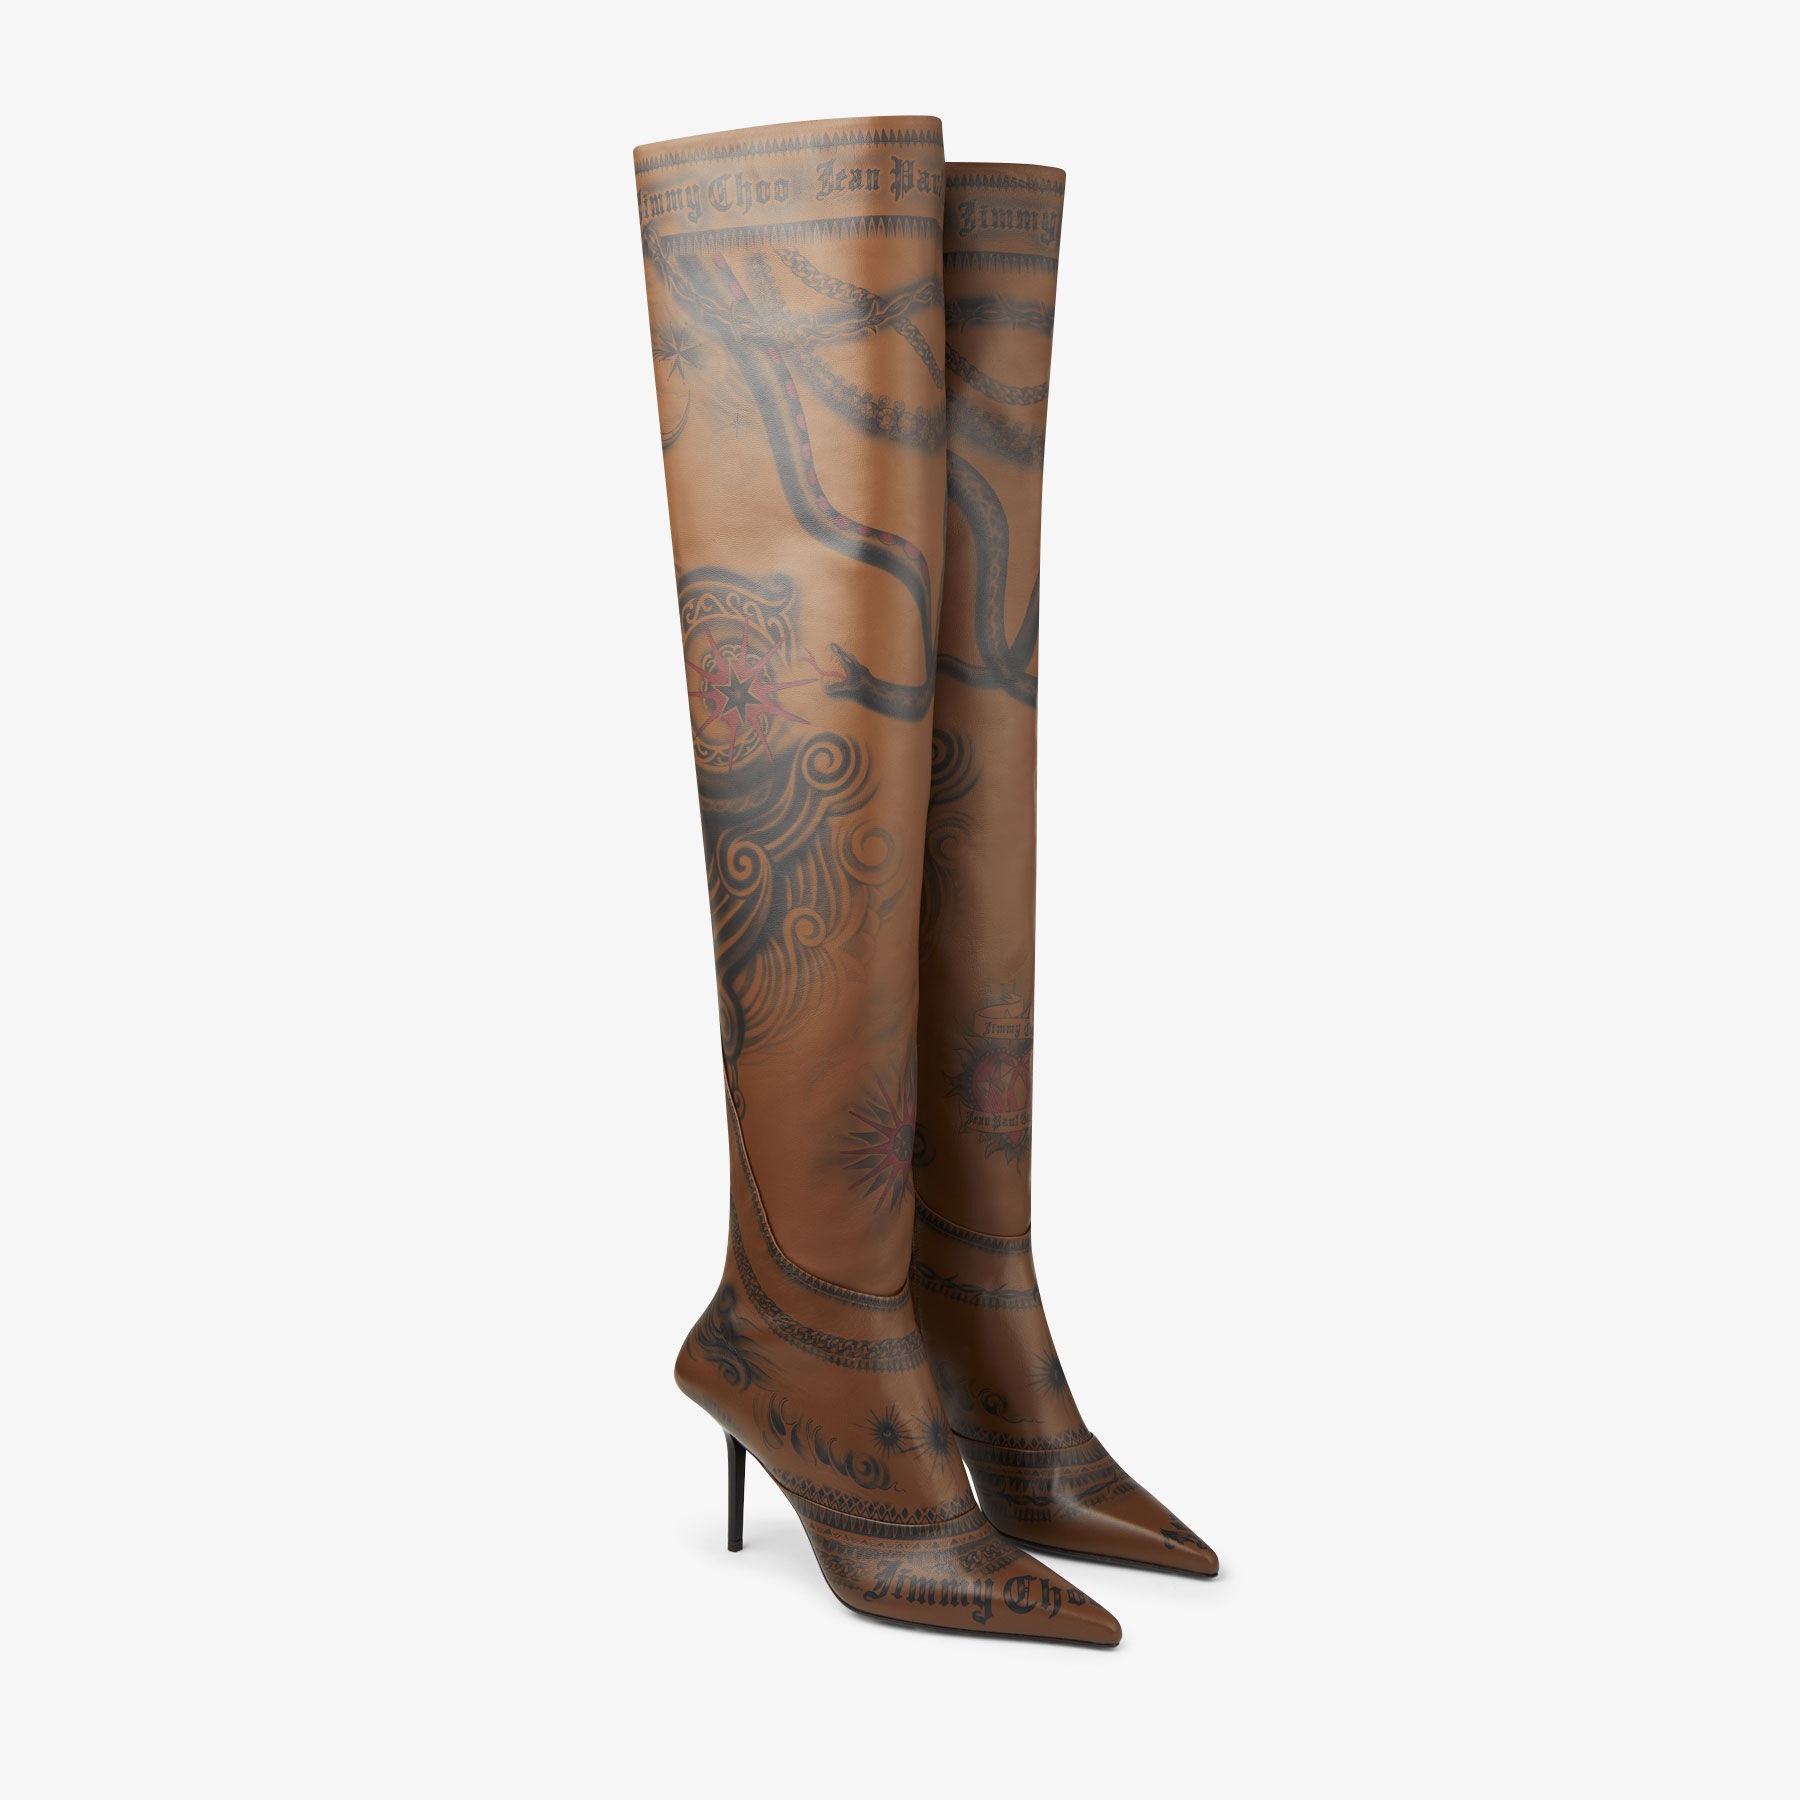 Jimmy Choo / Jean Paul Gaultier Over The Knee Boot 90
Clove Tattoo Printed Leather Over-The-Knee Boo - 3